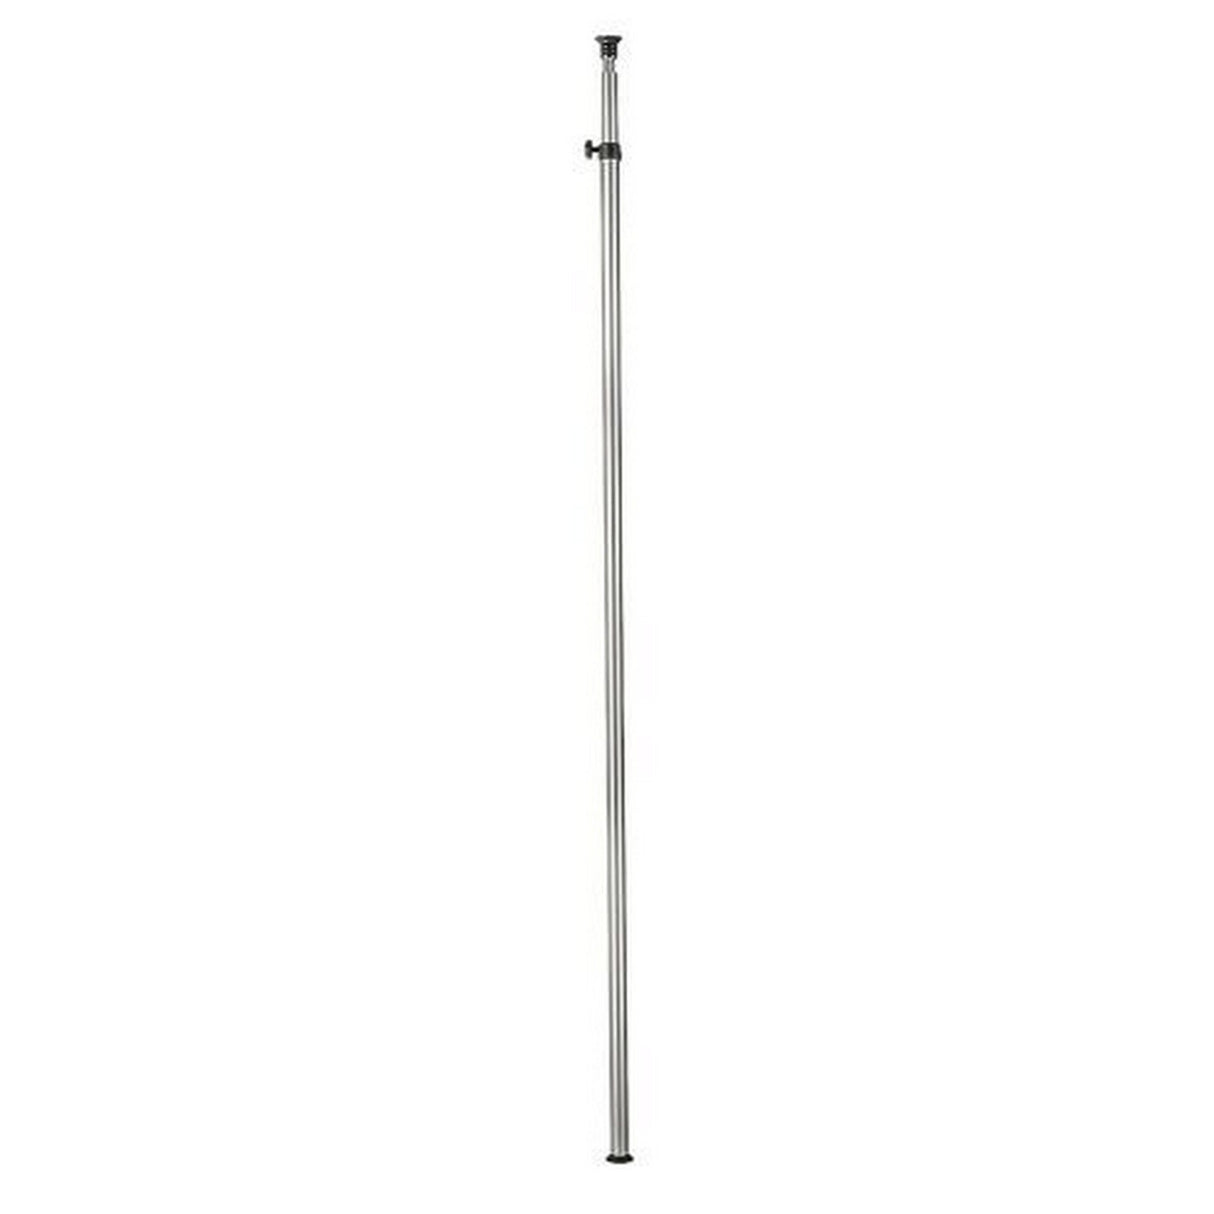 Manfrotto 170 Spring Loaded Floor-to-Ceiling Pole